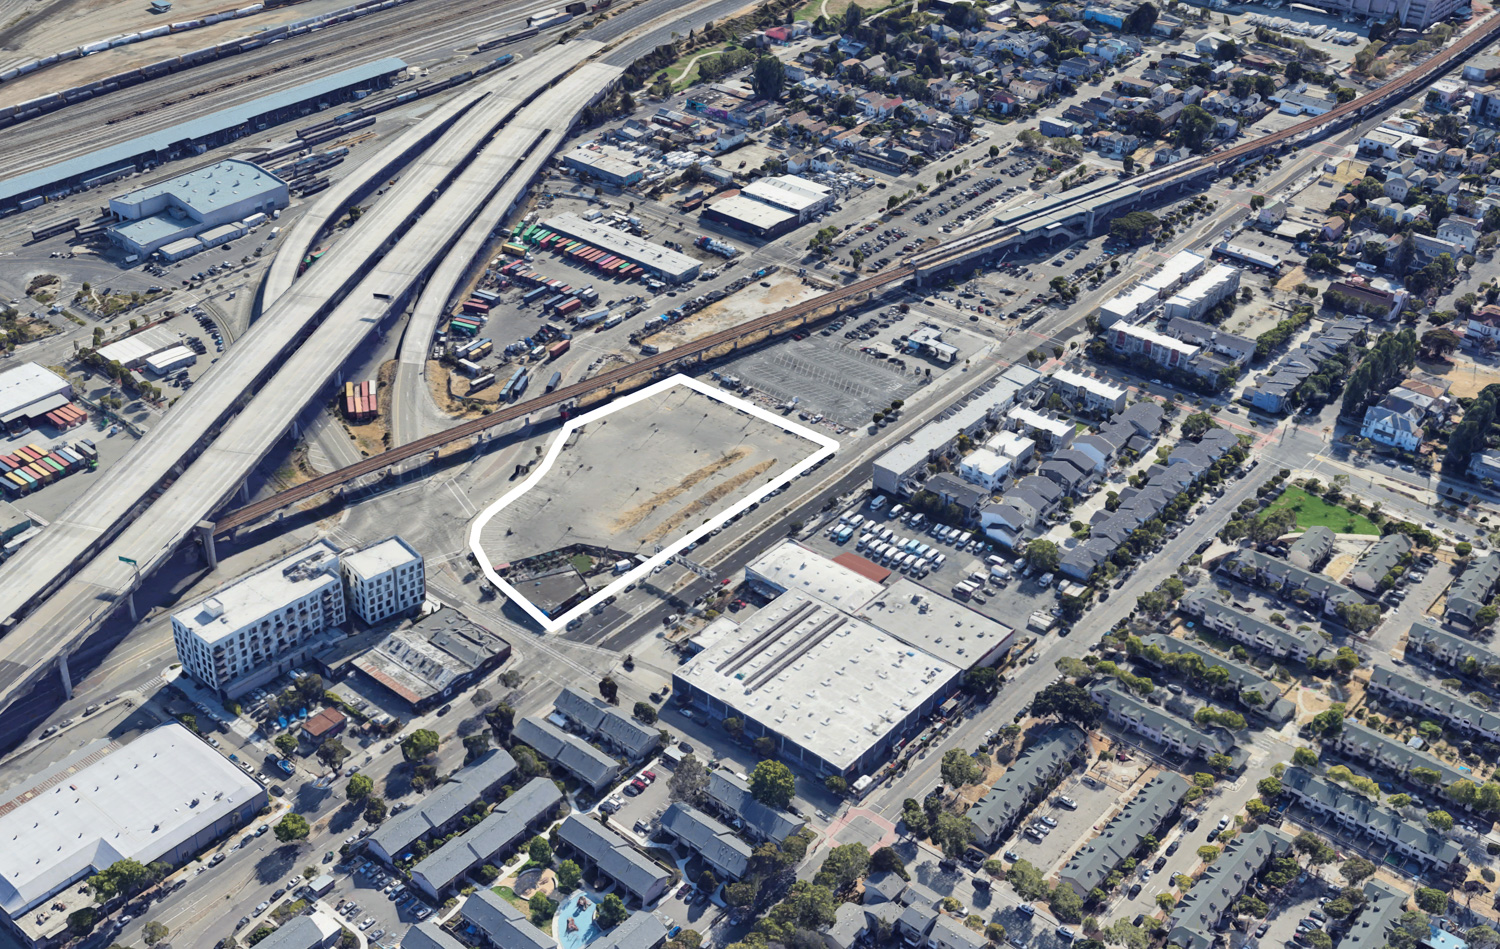 500 Kirkham Street outlined approximately by YIMBY, image by Google Satellite